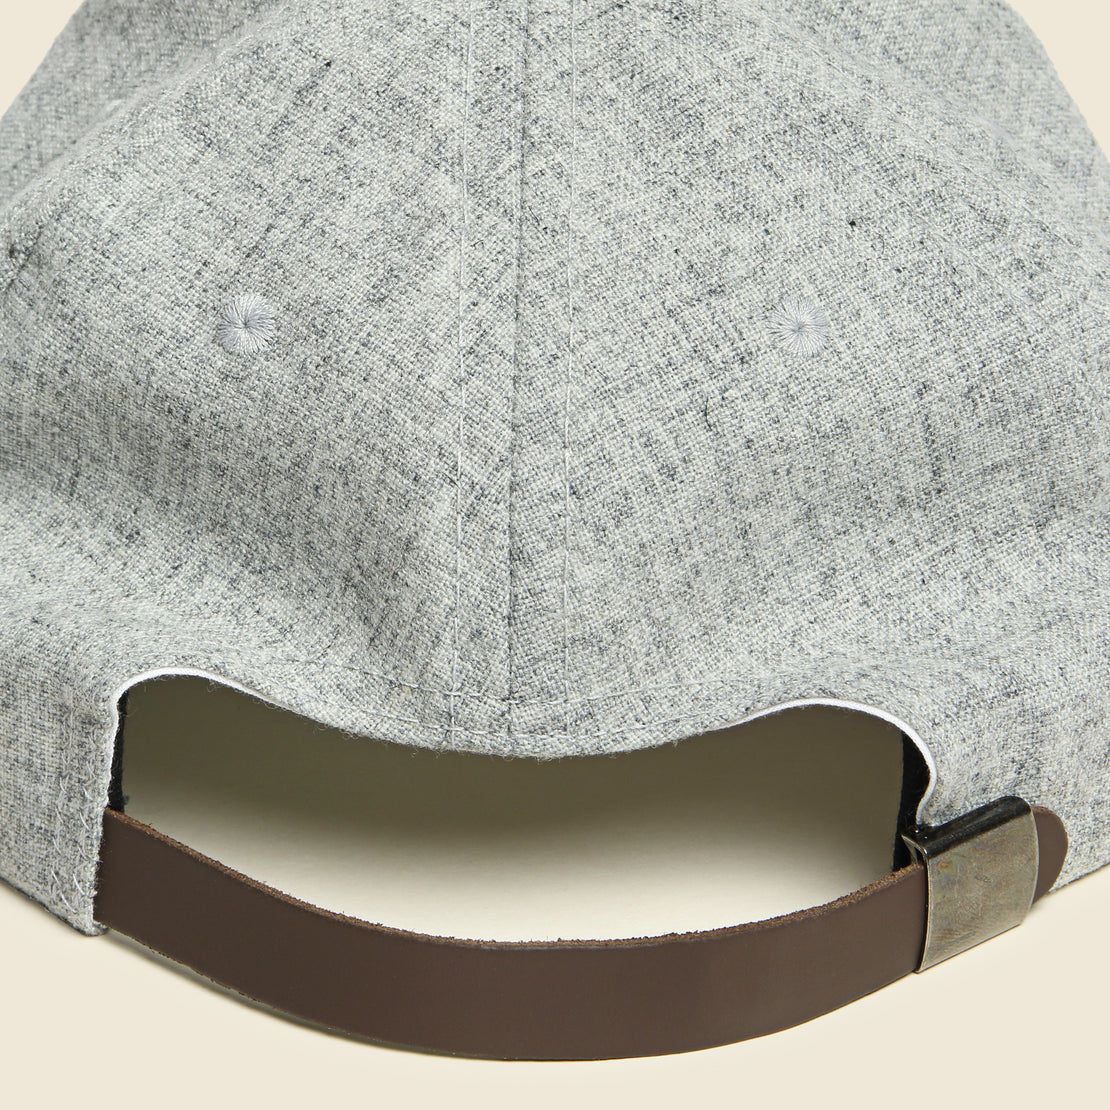 U.S. Tour of Japan Wool Hat - Grey - Ebbets Field Flannels - STAG Provisions - Accessories - Hats